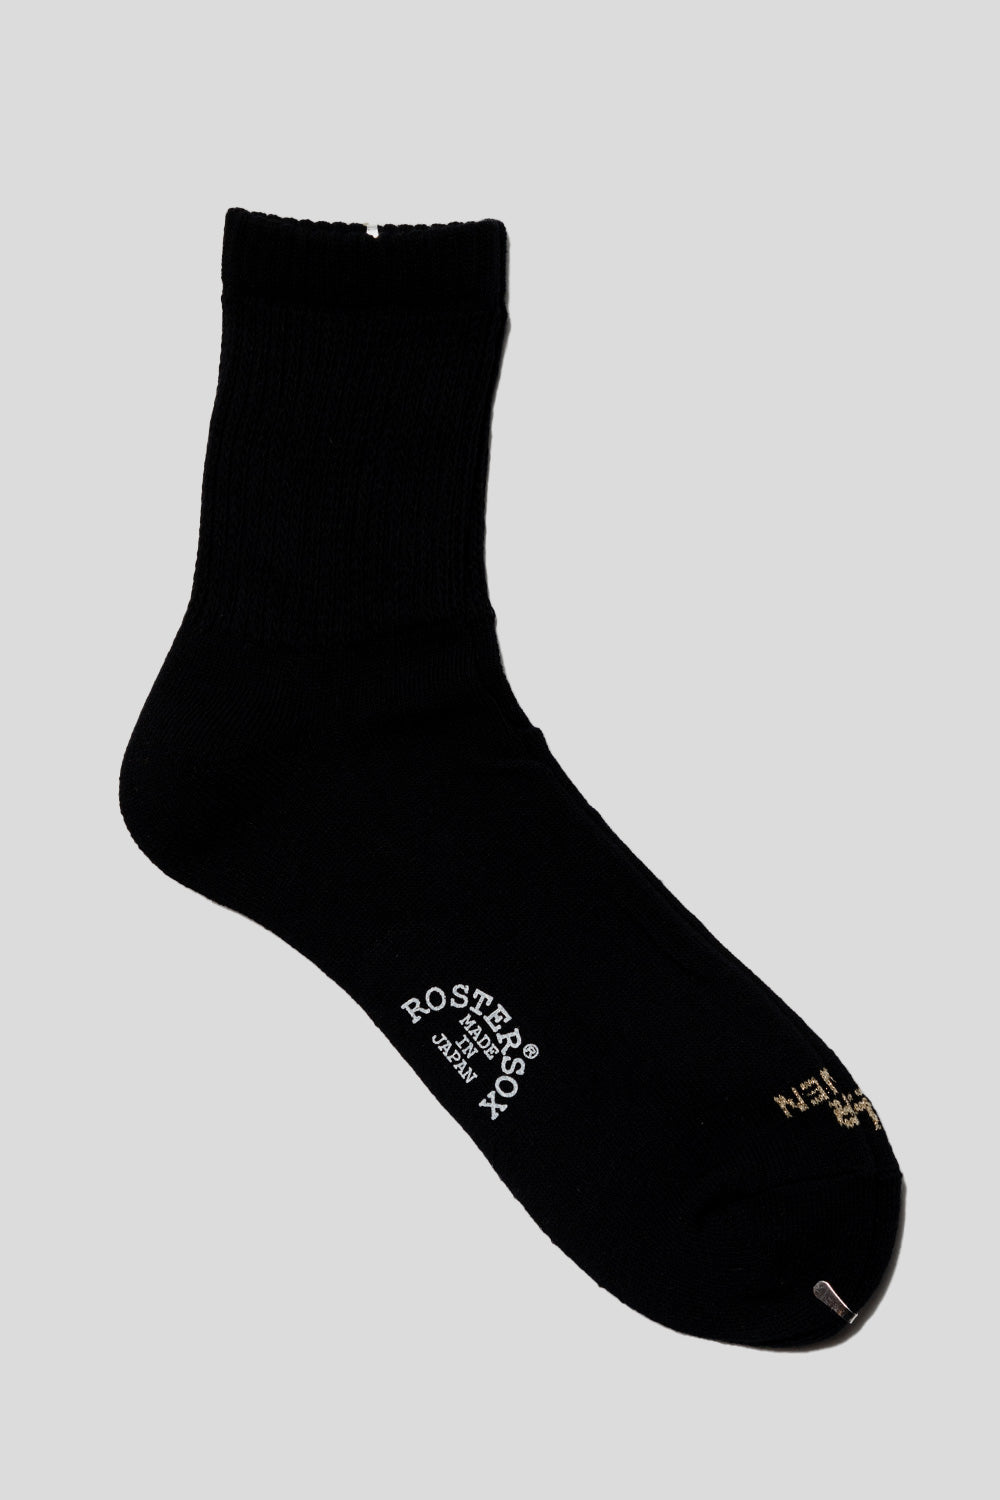 Rostersox Linen and Cotton Socks in Black